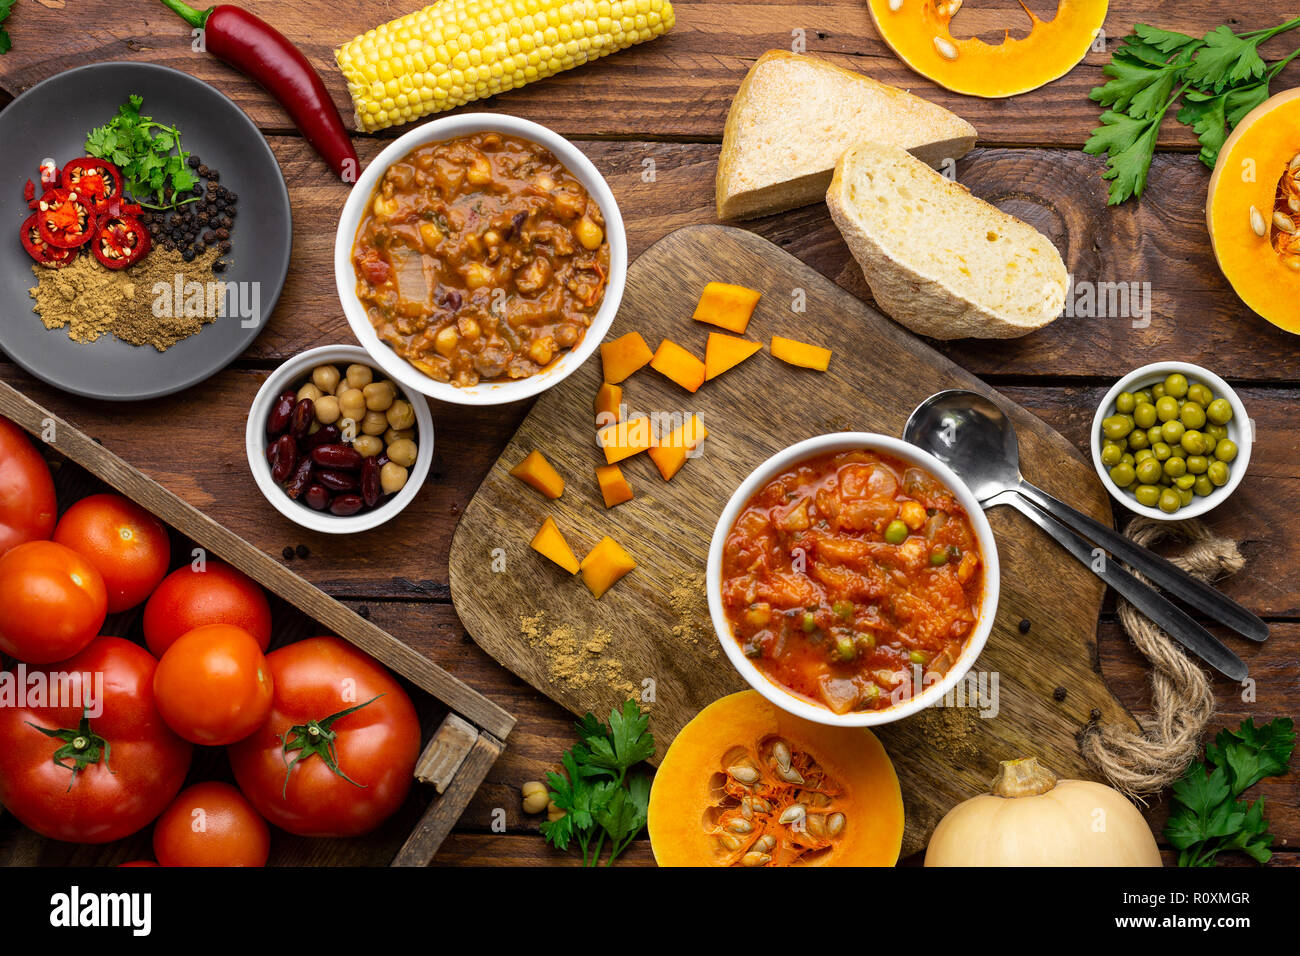 https://c8.alamy.com/comp/R0XMGR/two-winter-warmer-stews-surrounded-by-ingredients-shot-overhead-butternut-squash-stew-and-chilli-con-carne-R0XMGR.jpg